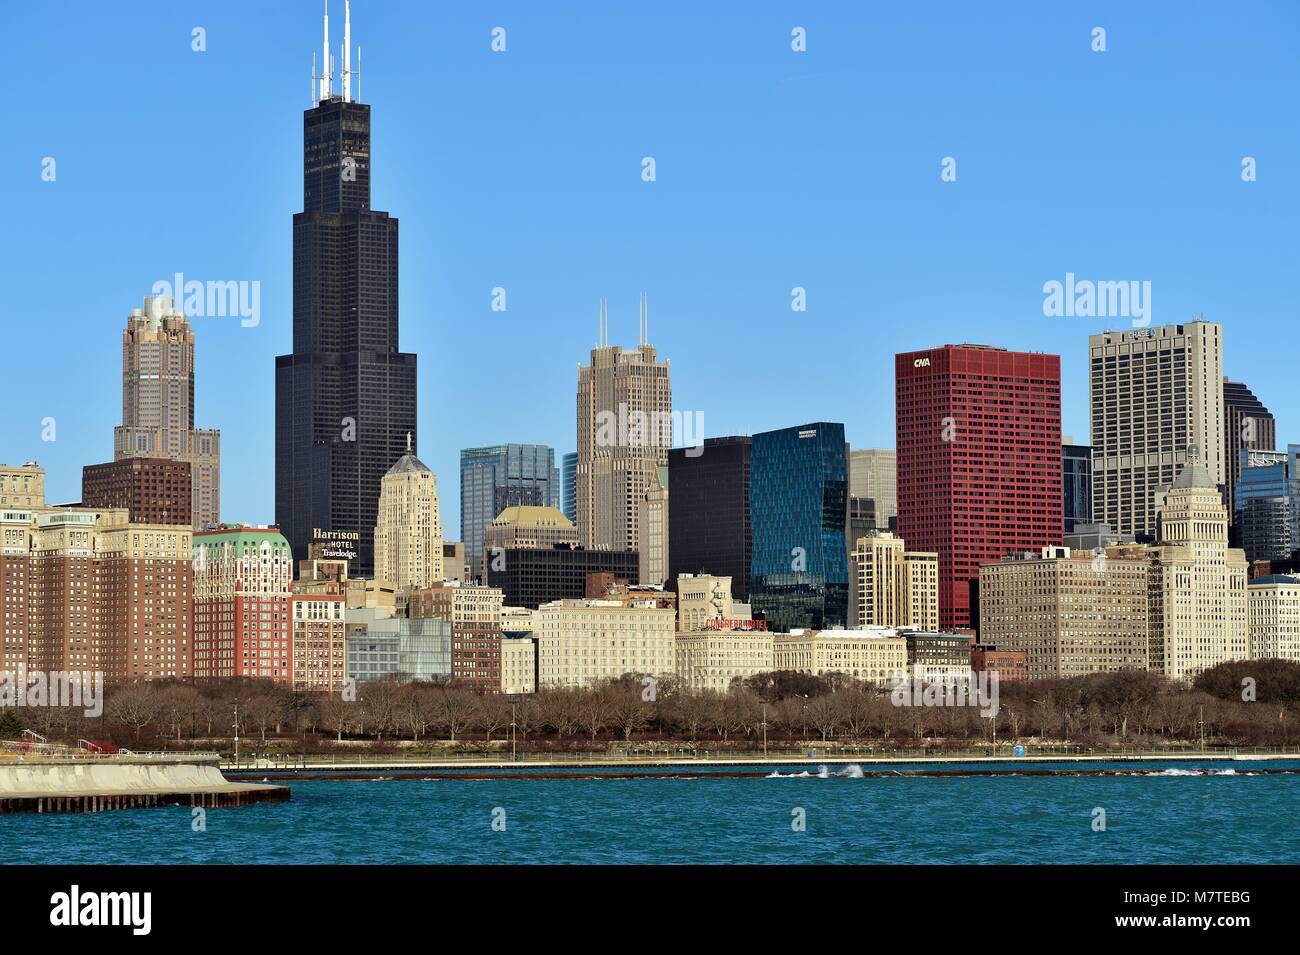 Chicago, Illinois, USA. A portion of the Chicago skyline as seen from the Museum Campus just south of downtown on a bright late winter day. Stock Photo